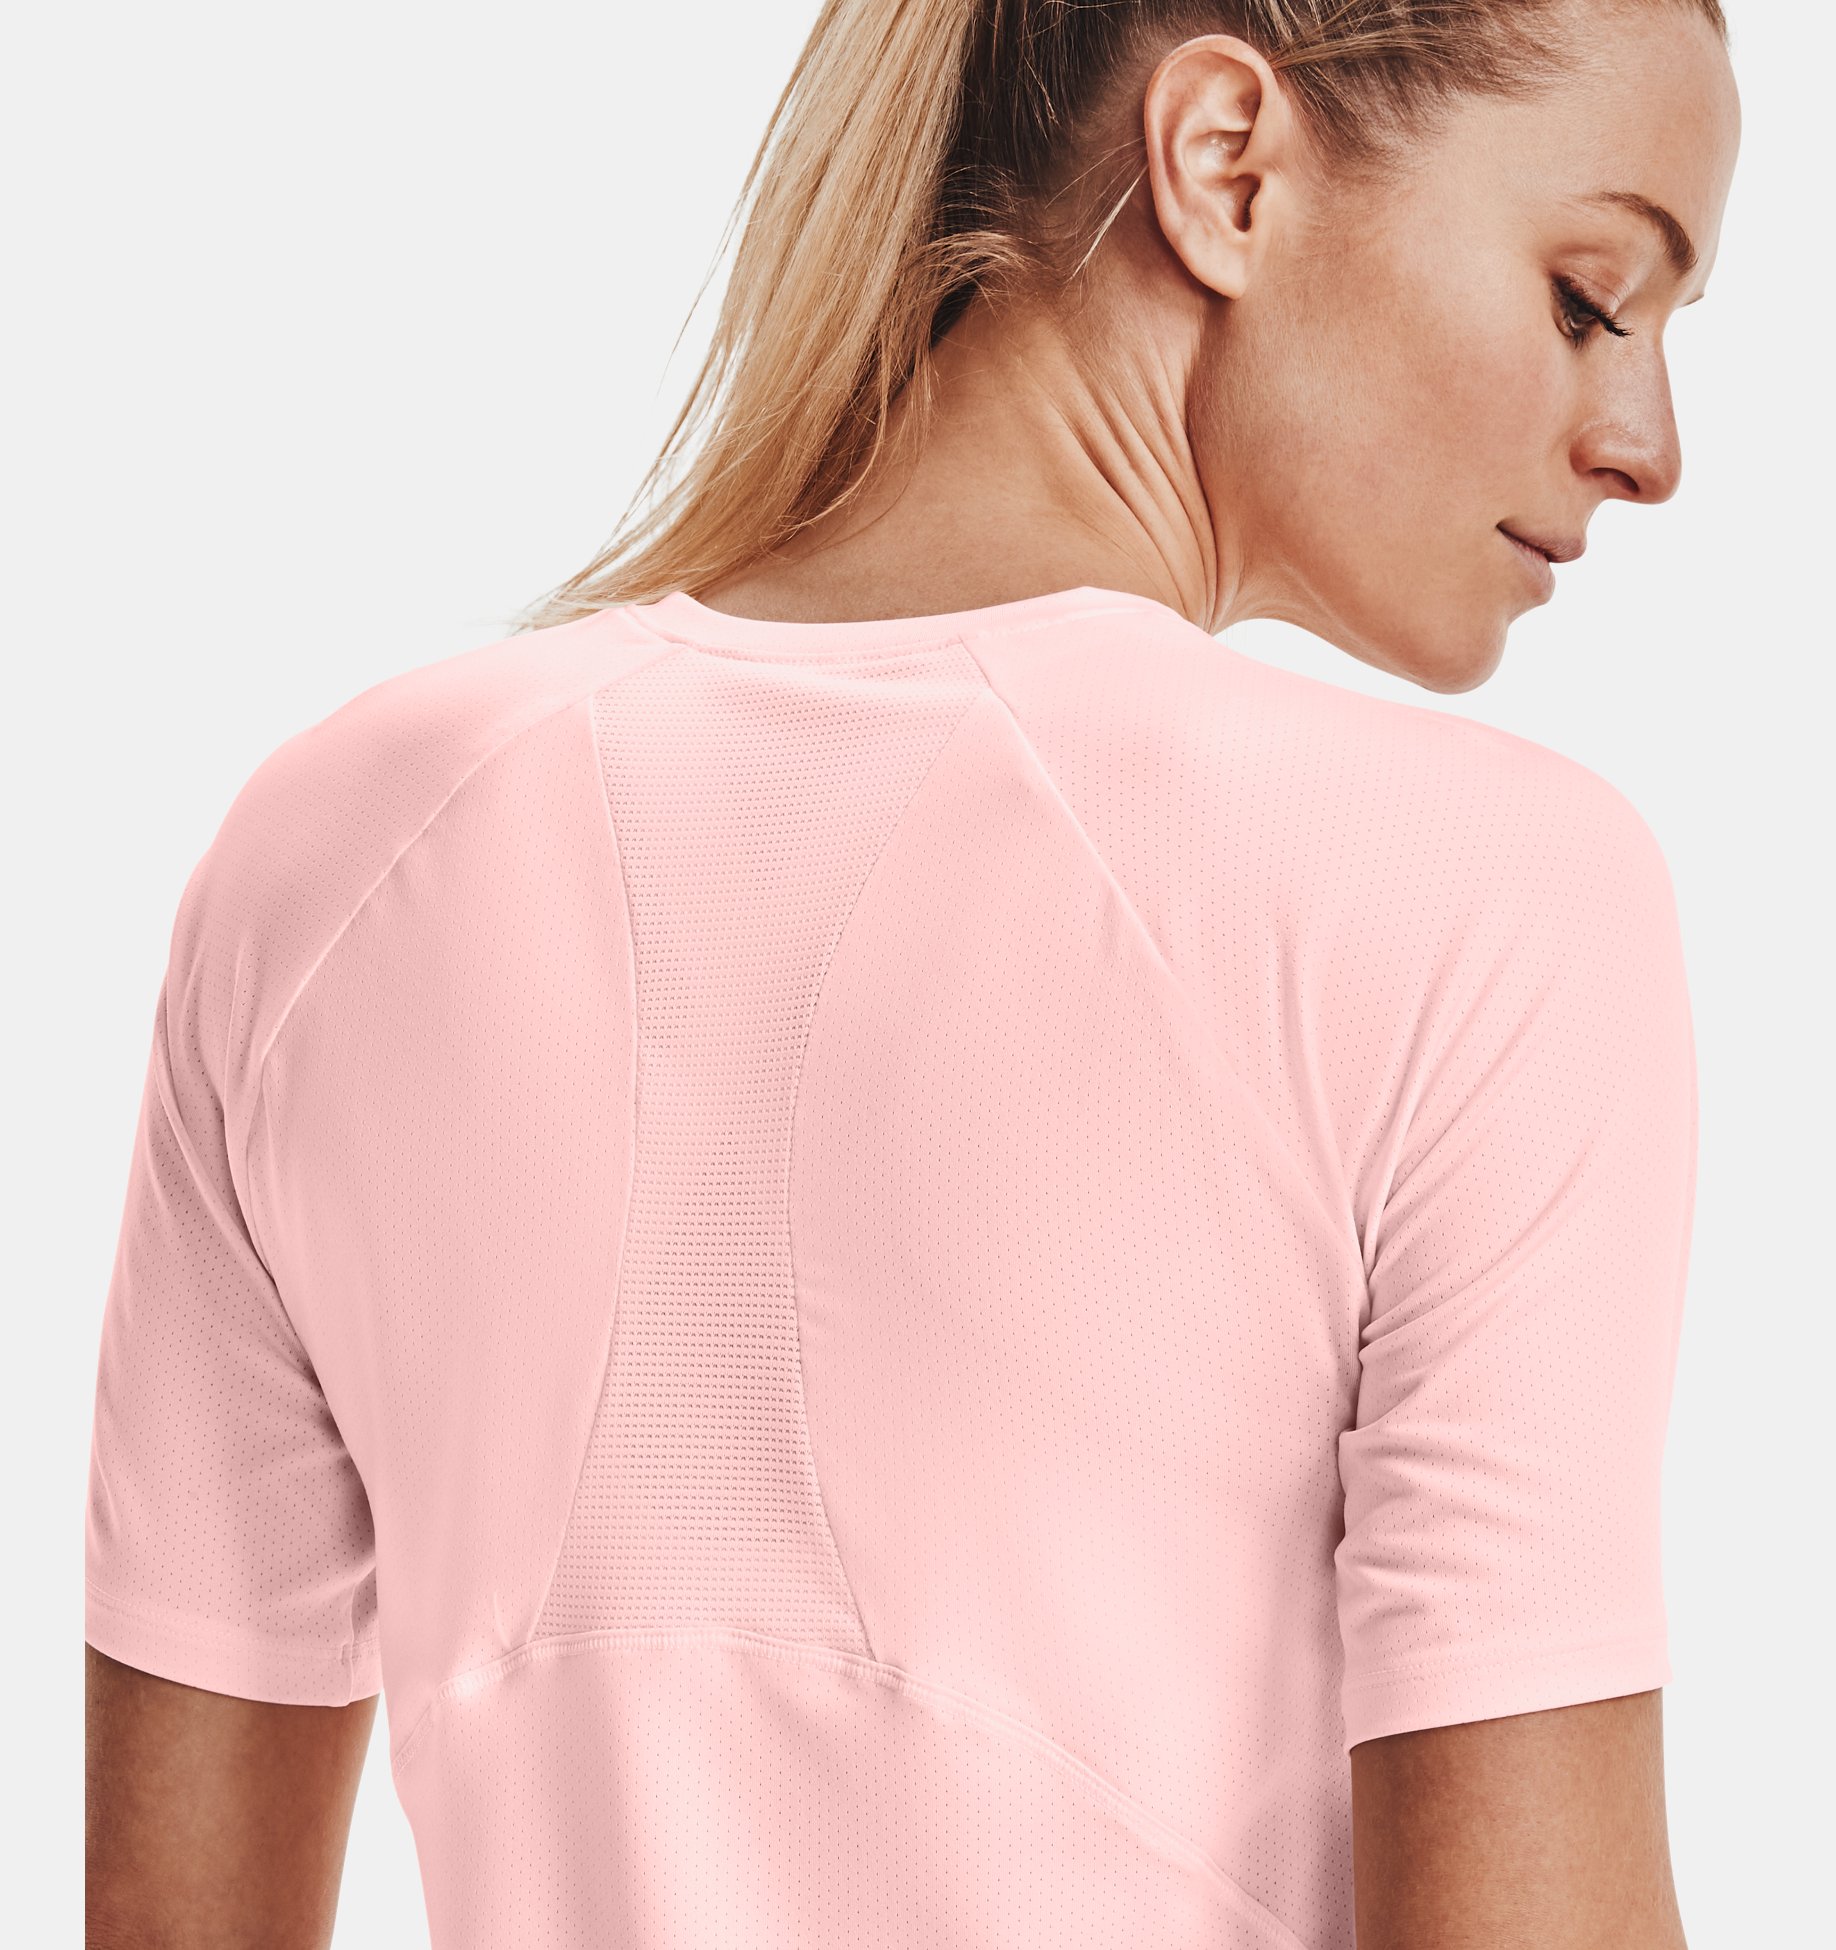 Under Armour Womens Coolswitch 3/4 Half Sleeve Tee 